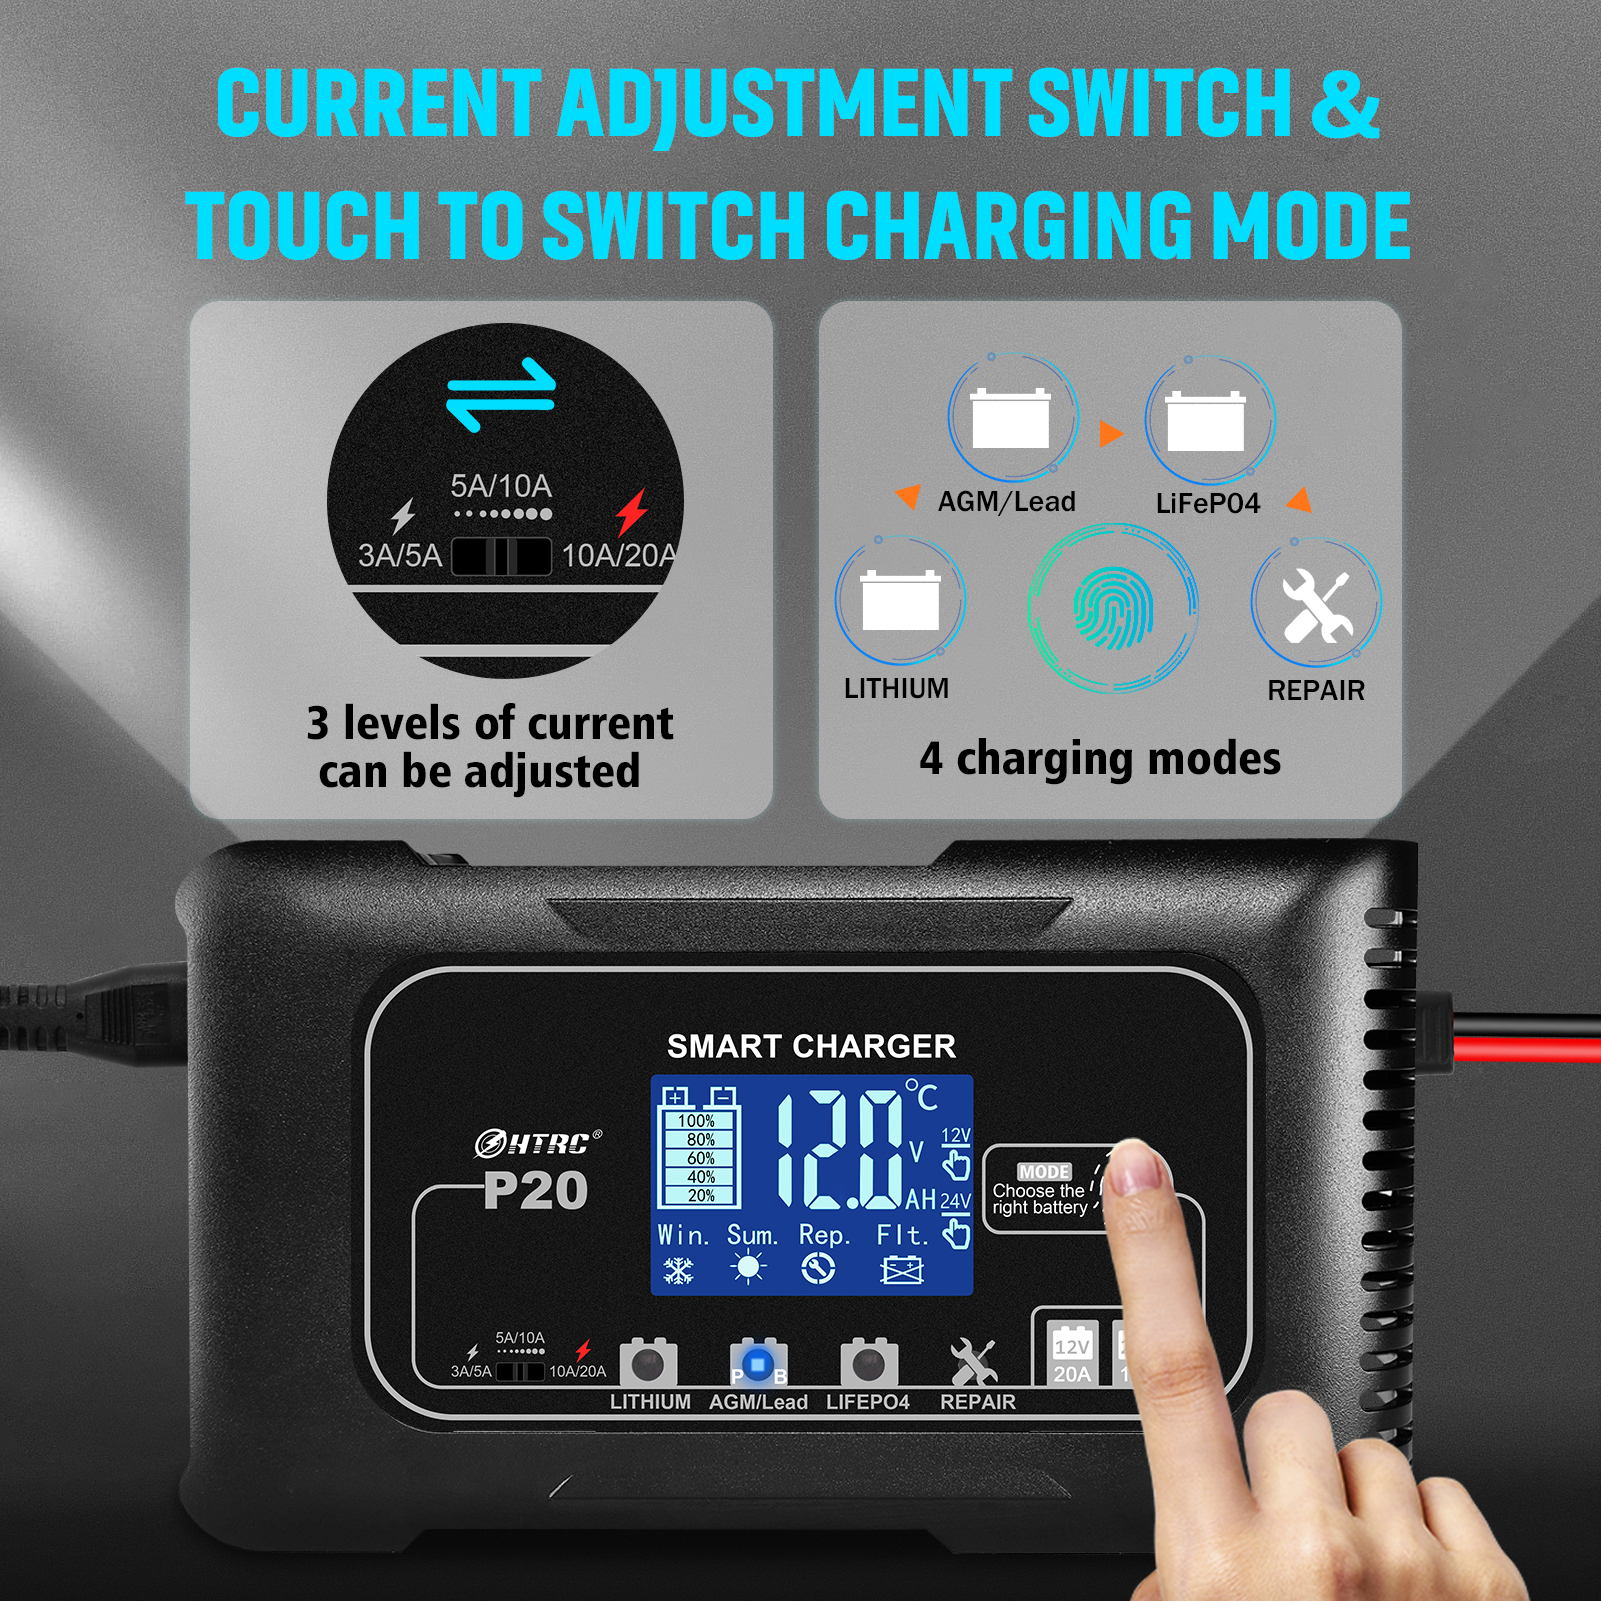 Current adjustment switch and touch to switch charging mode